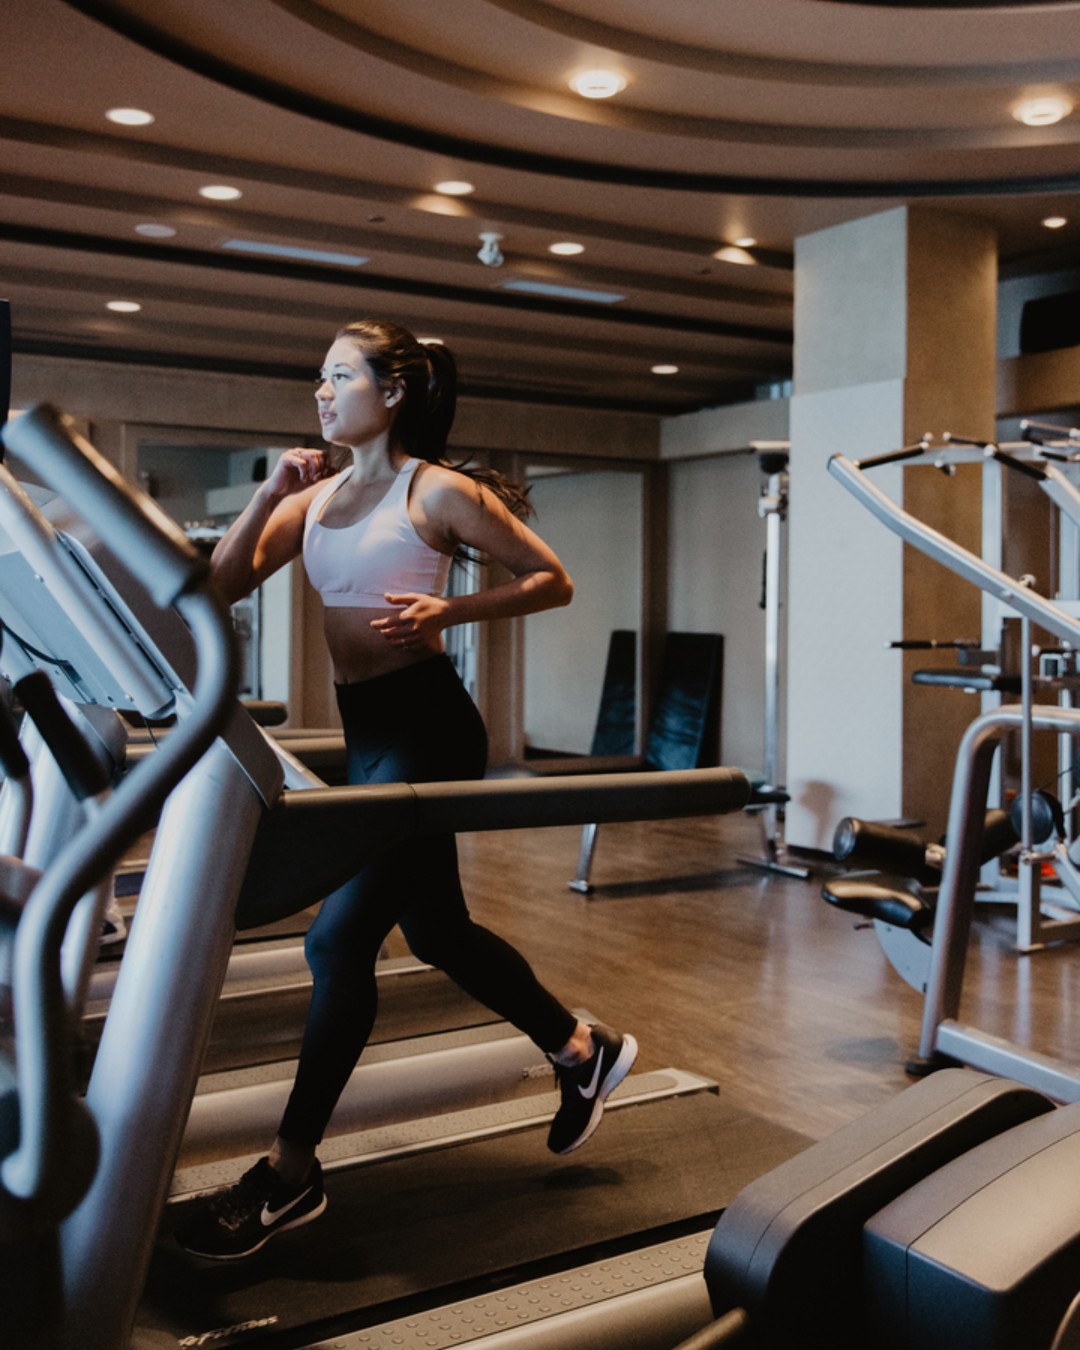 Pan Pacific Vancouver on X: Our Fitness Centre is fully equipped to help  you keep up with your New Year's health goals. Visit our website to view our  available services  #PanPacificVan #